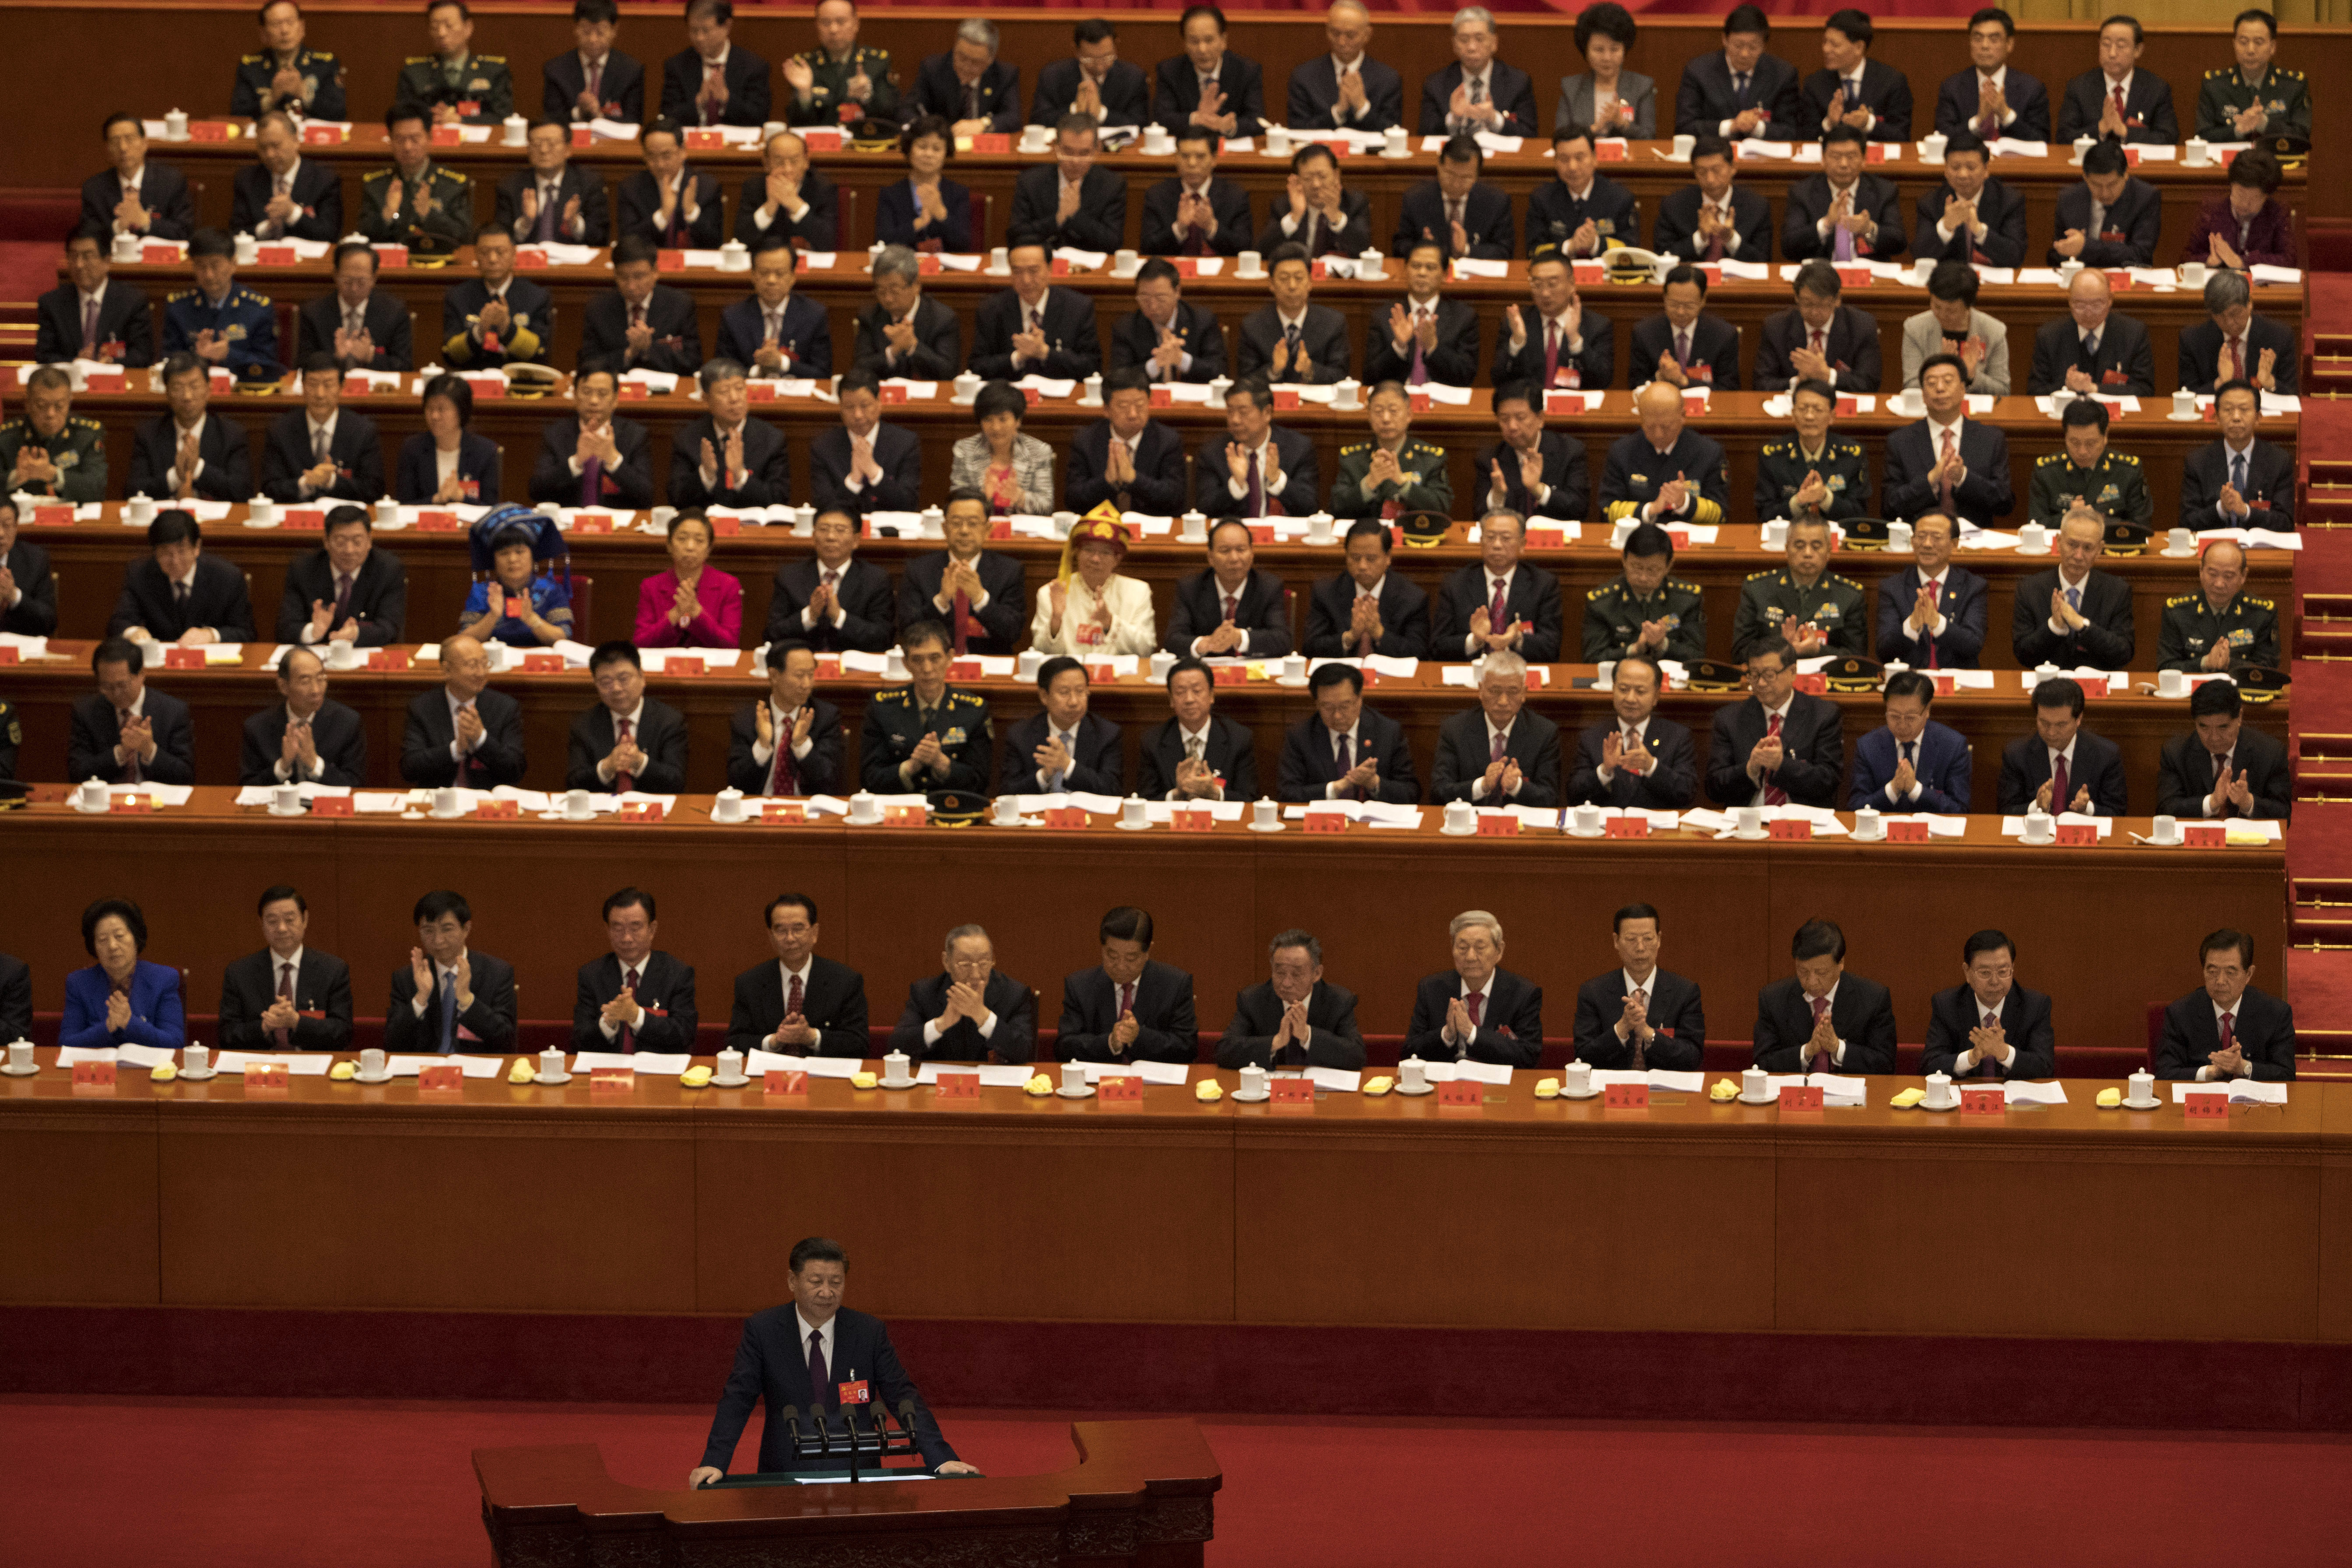 Chinese President Xi Jinping delivers a speech at the opening ceremony of the 19th Party Congress held at the Great Hall of the People in Beijing, China, Wednesday, Oct. 18, 2017. Chinese President Xi Jinping on Wednesday urged a reinvigorated Communist Party to take on a more forceful role in society and economic development to better address 